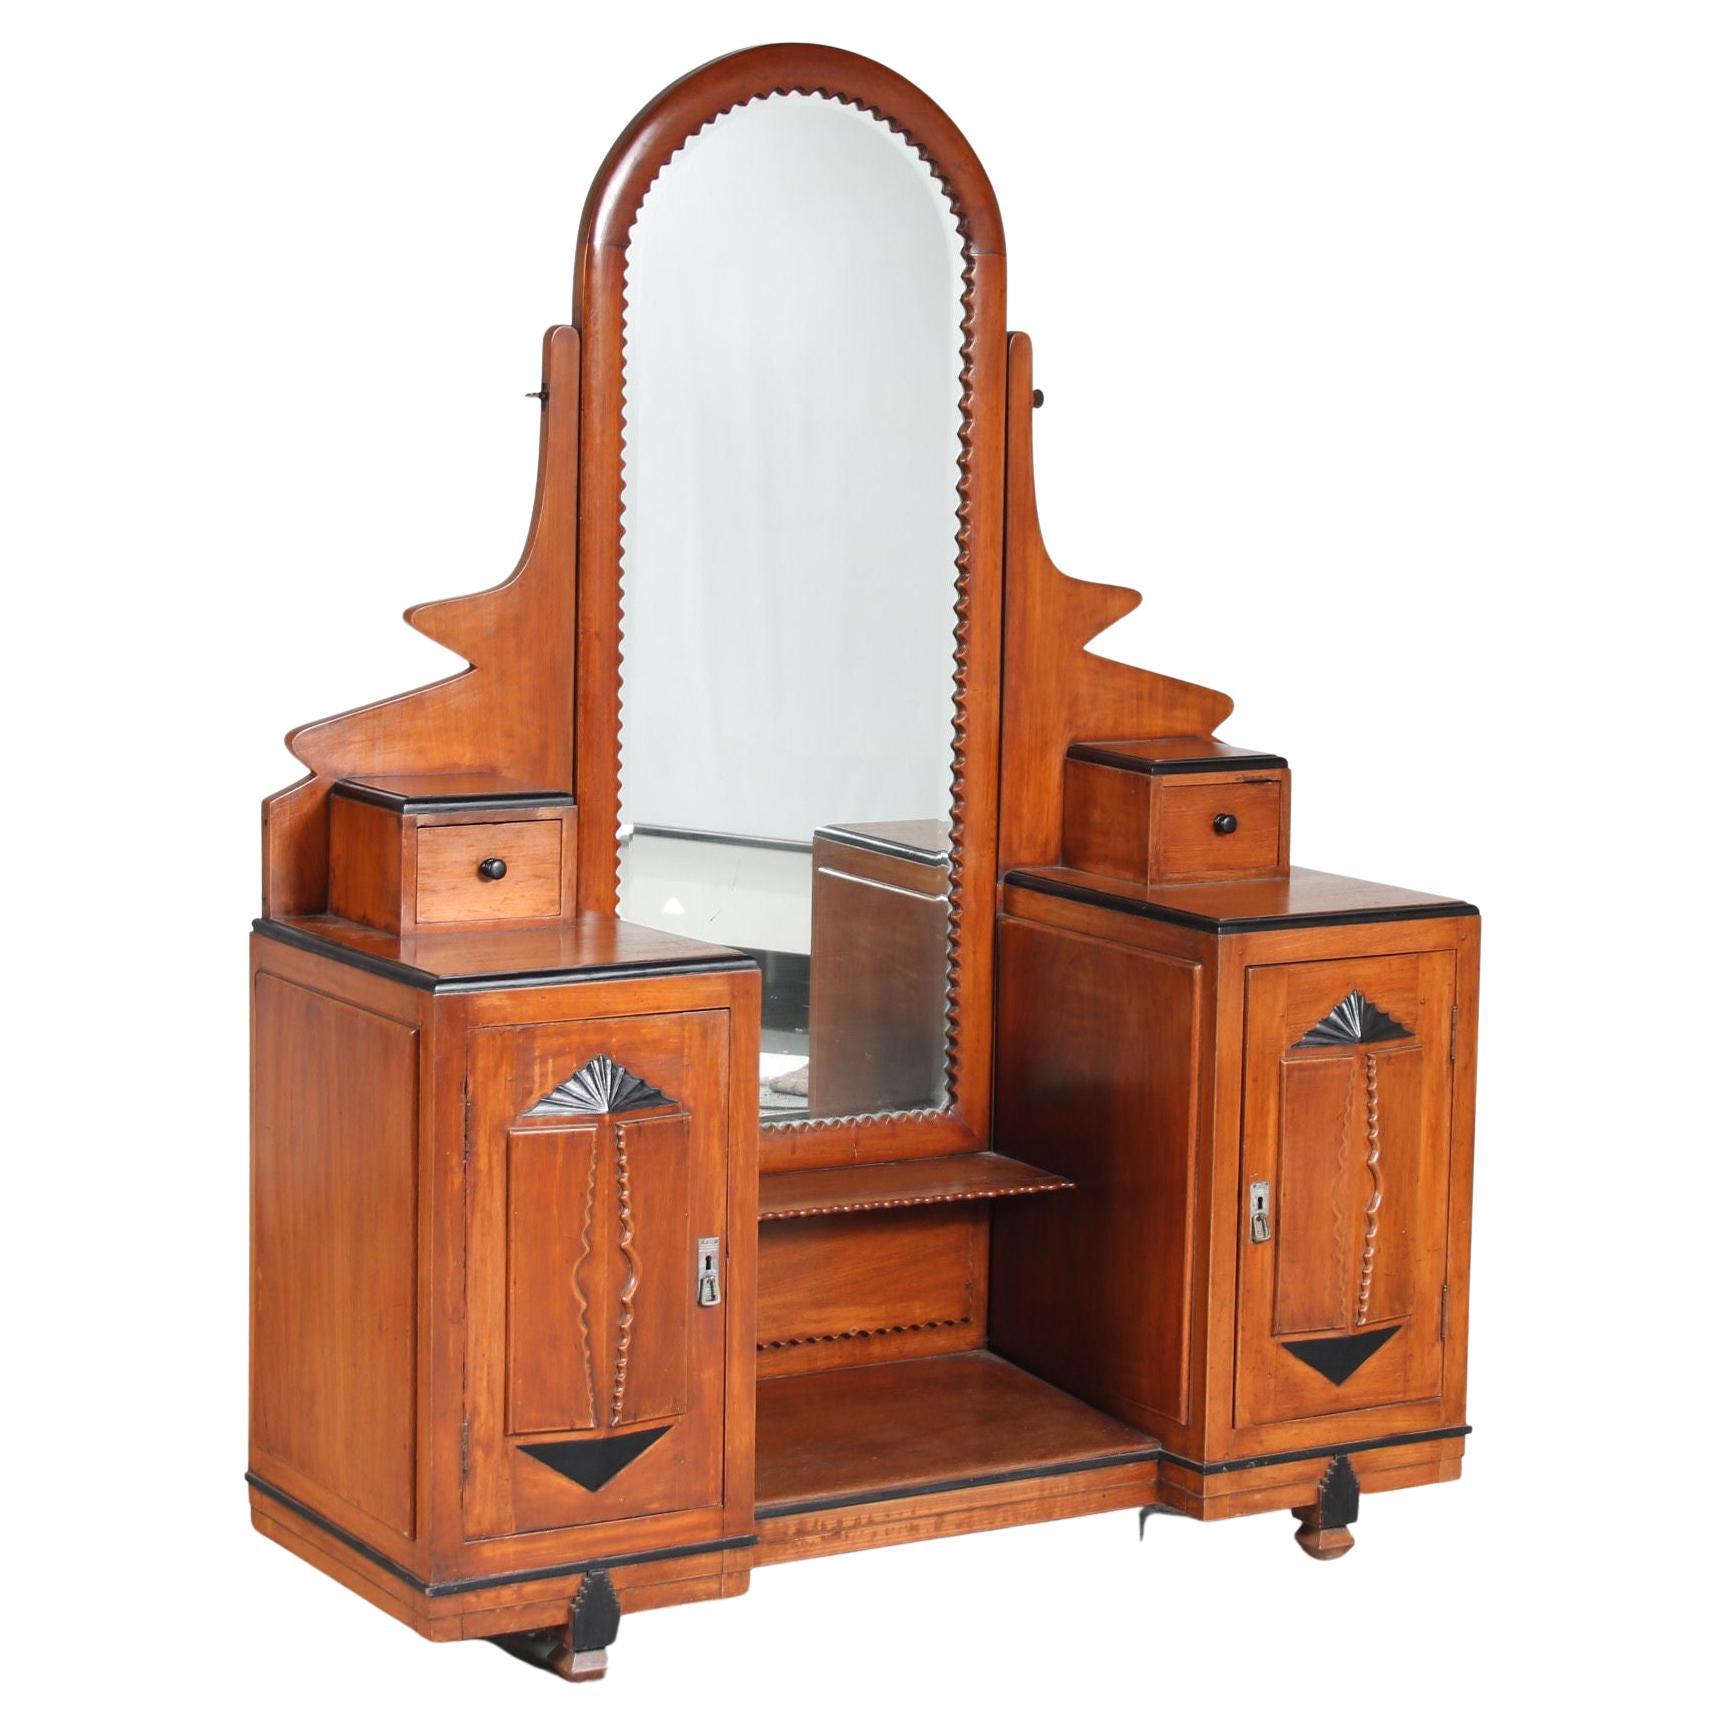 Colonial Dressing Table in Amsterdam School Style, Indonesia, 1920